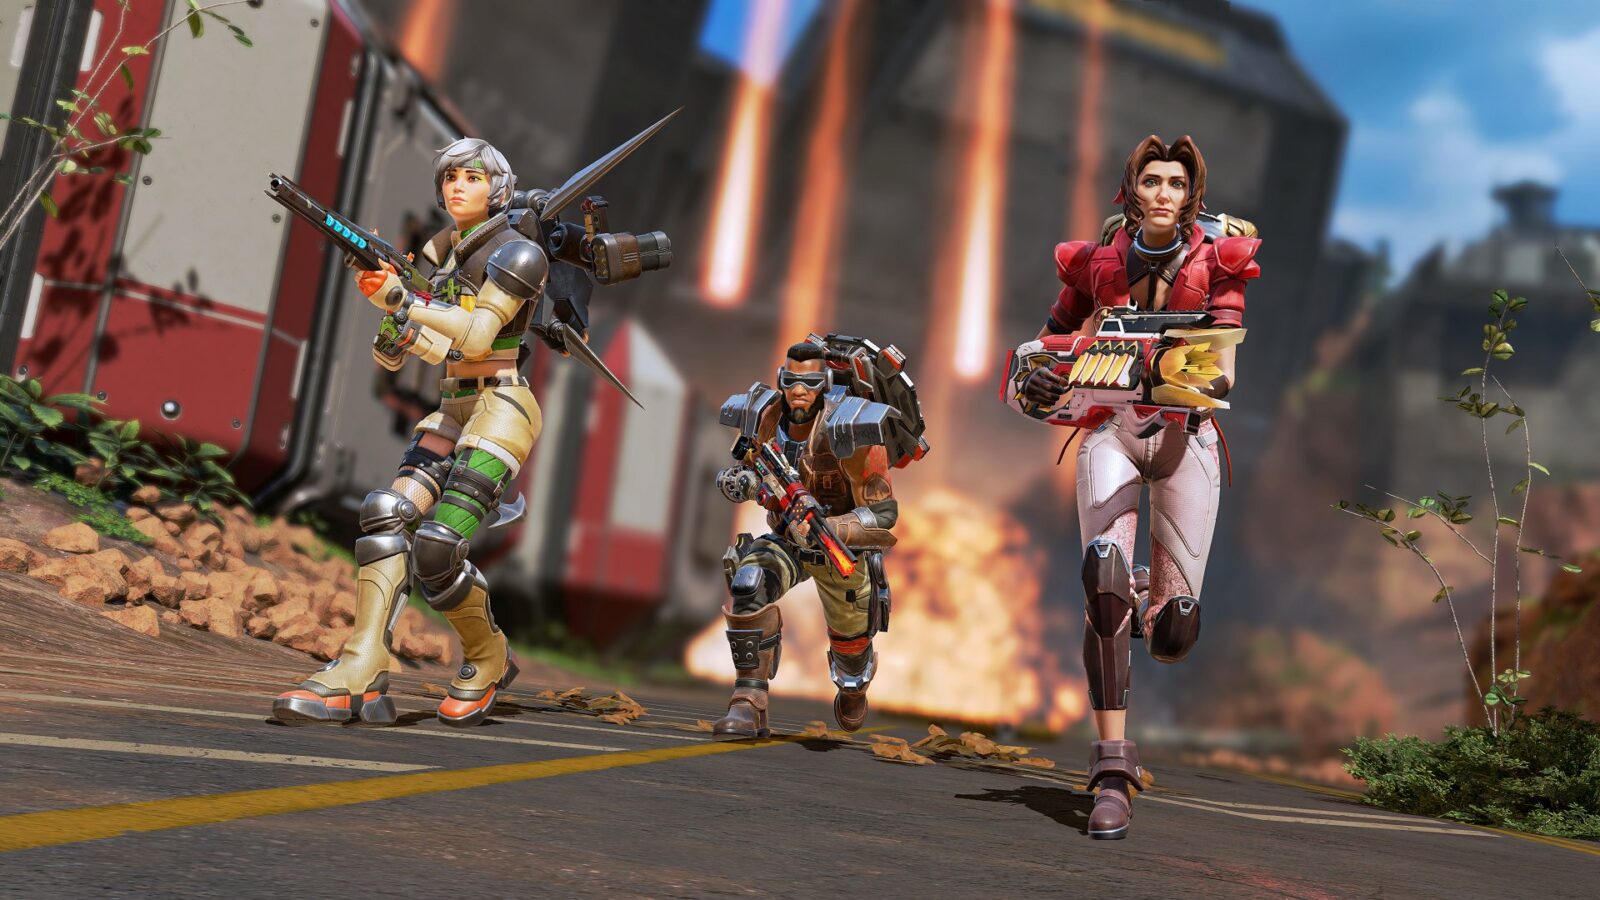 Players Apex Legends are anything but happy with that 120Hz